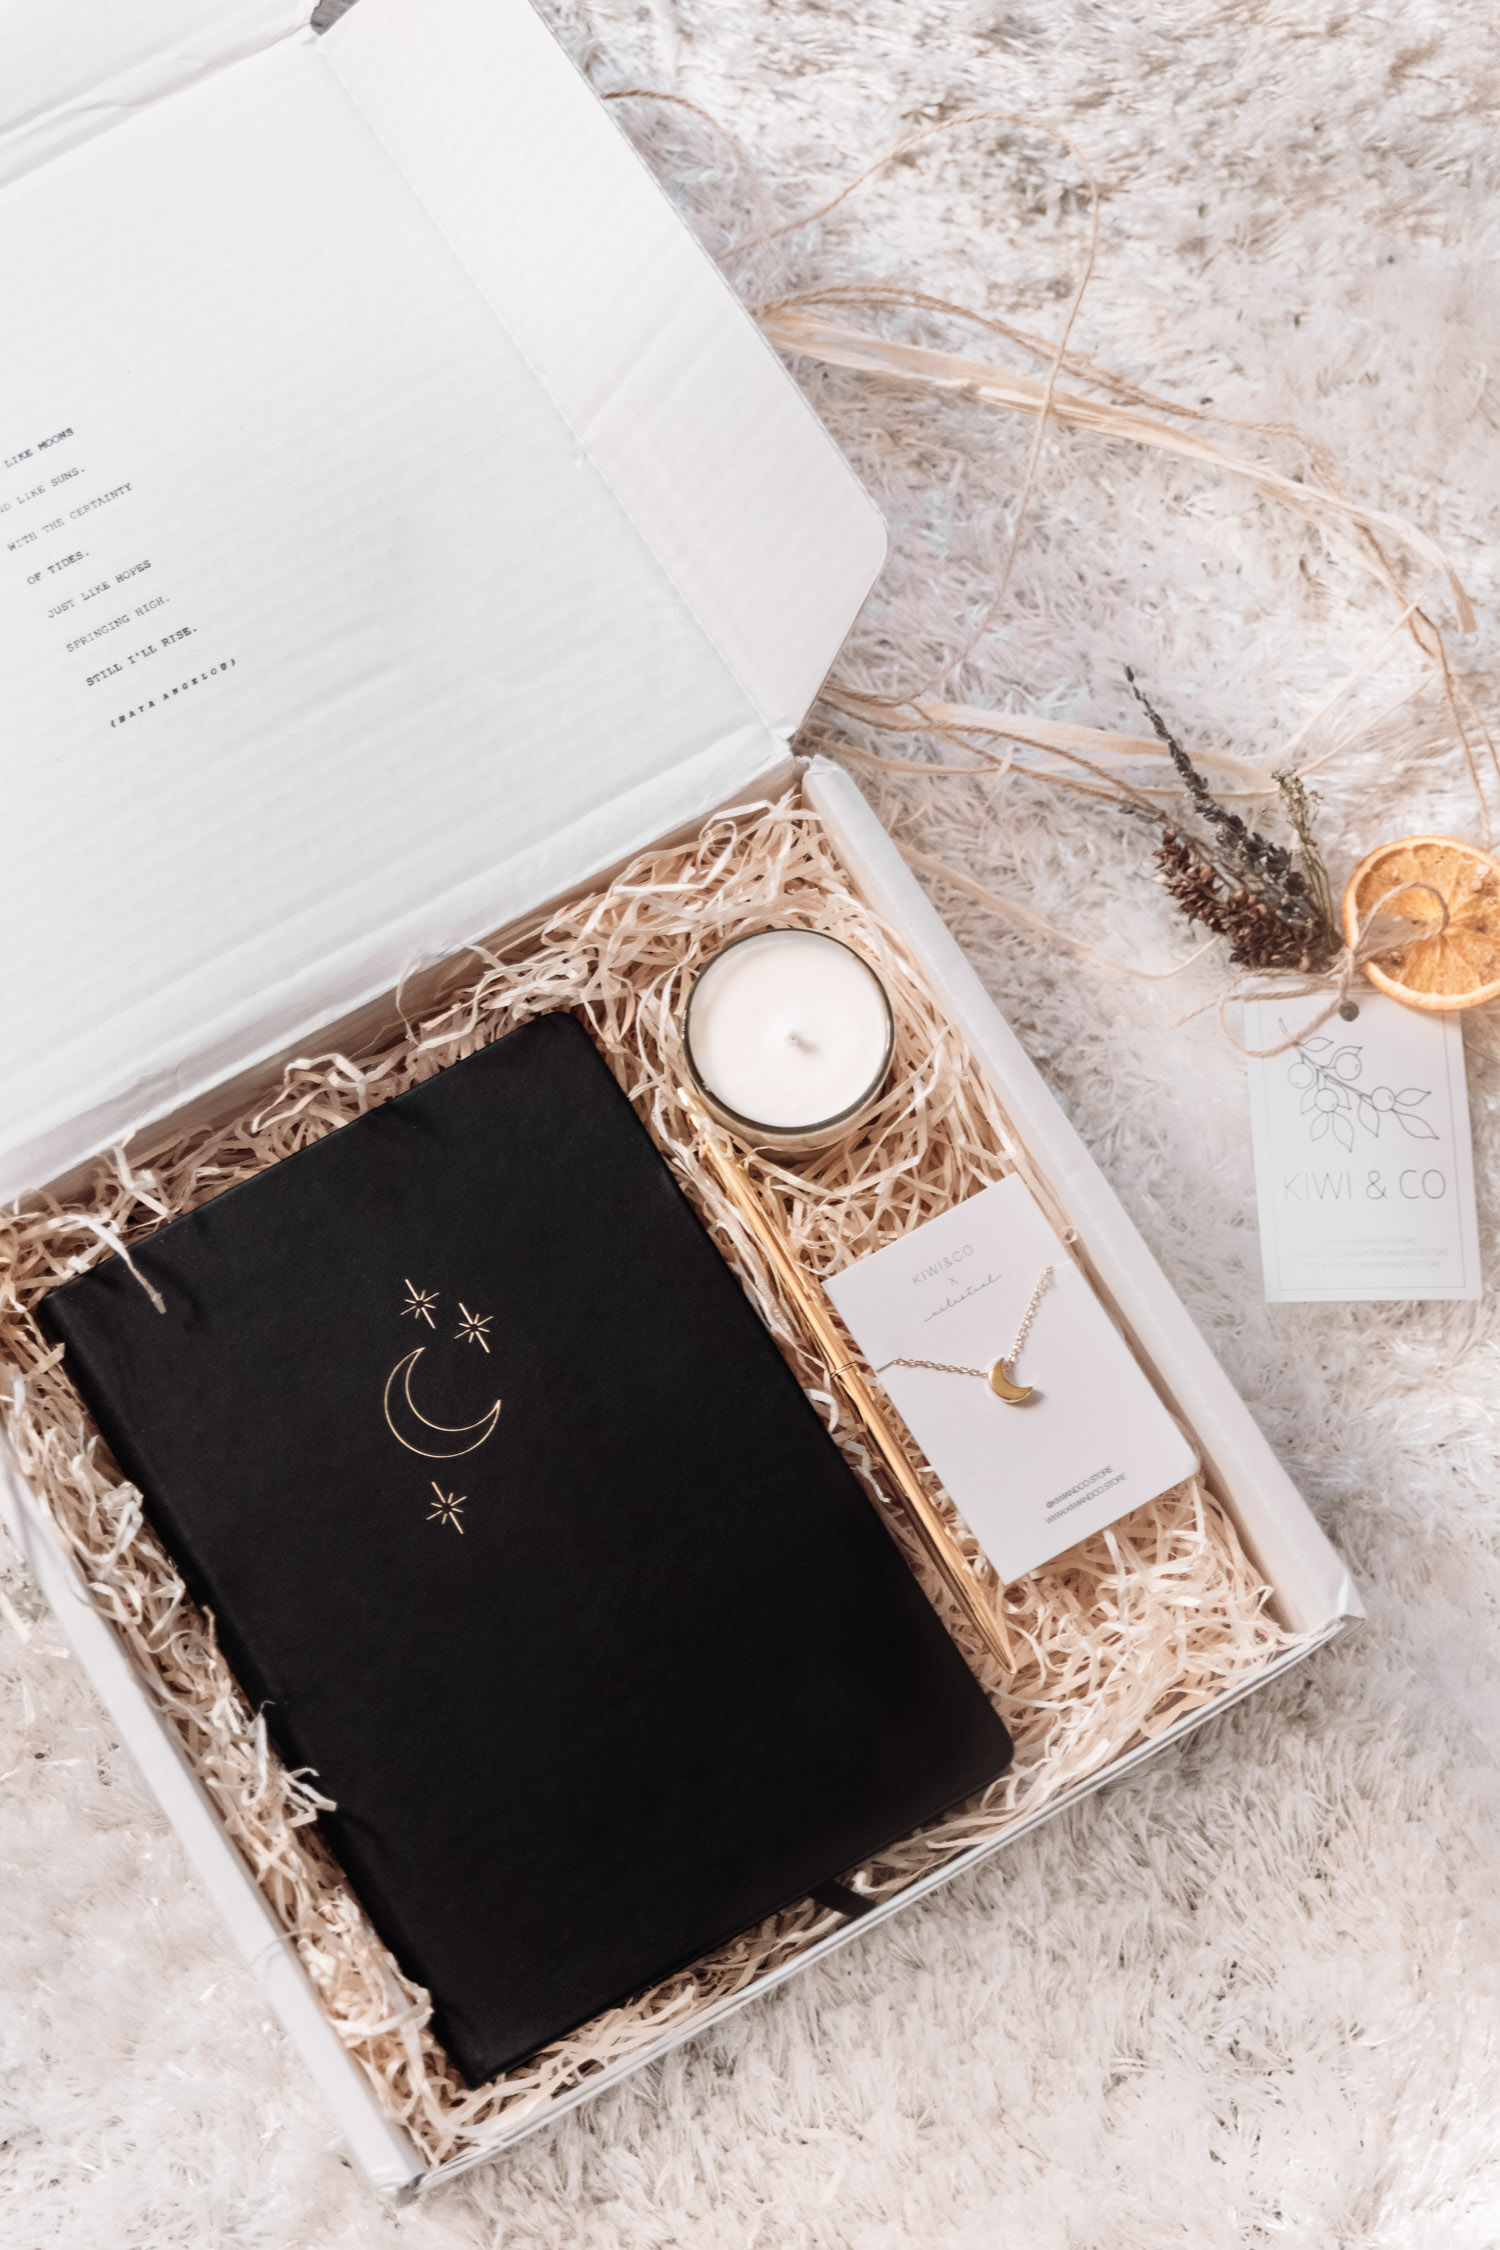 Vegan Gift Box with Moon Bullet Journal from Kiwi & Co